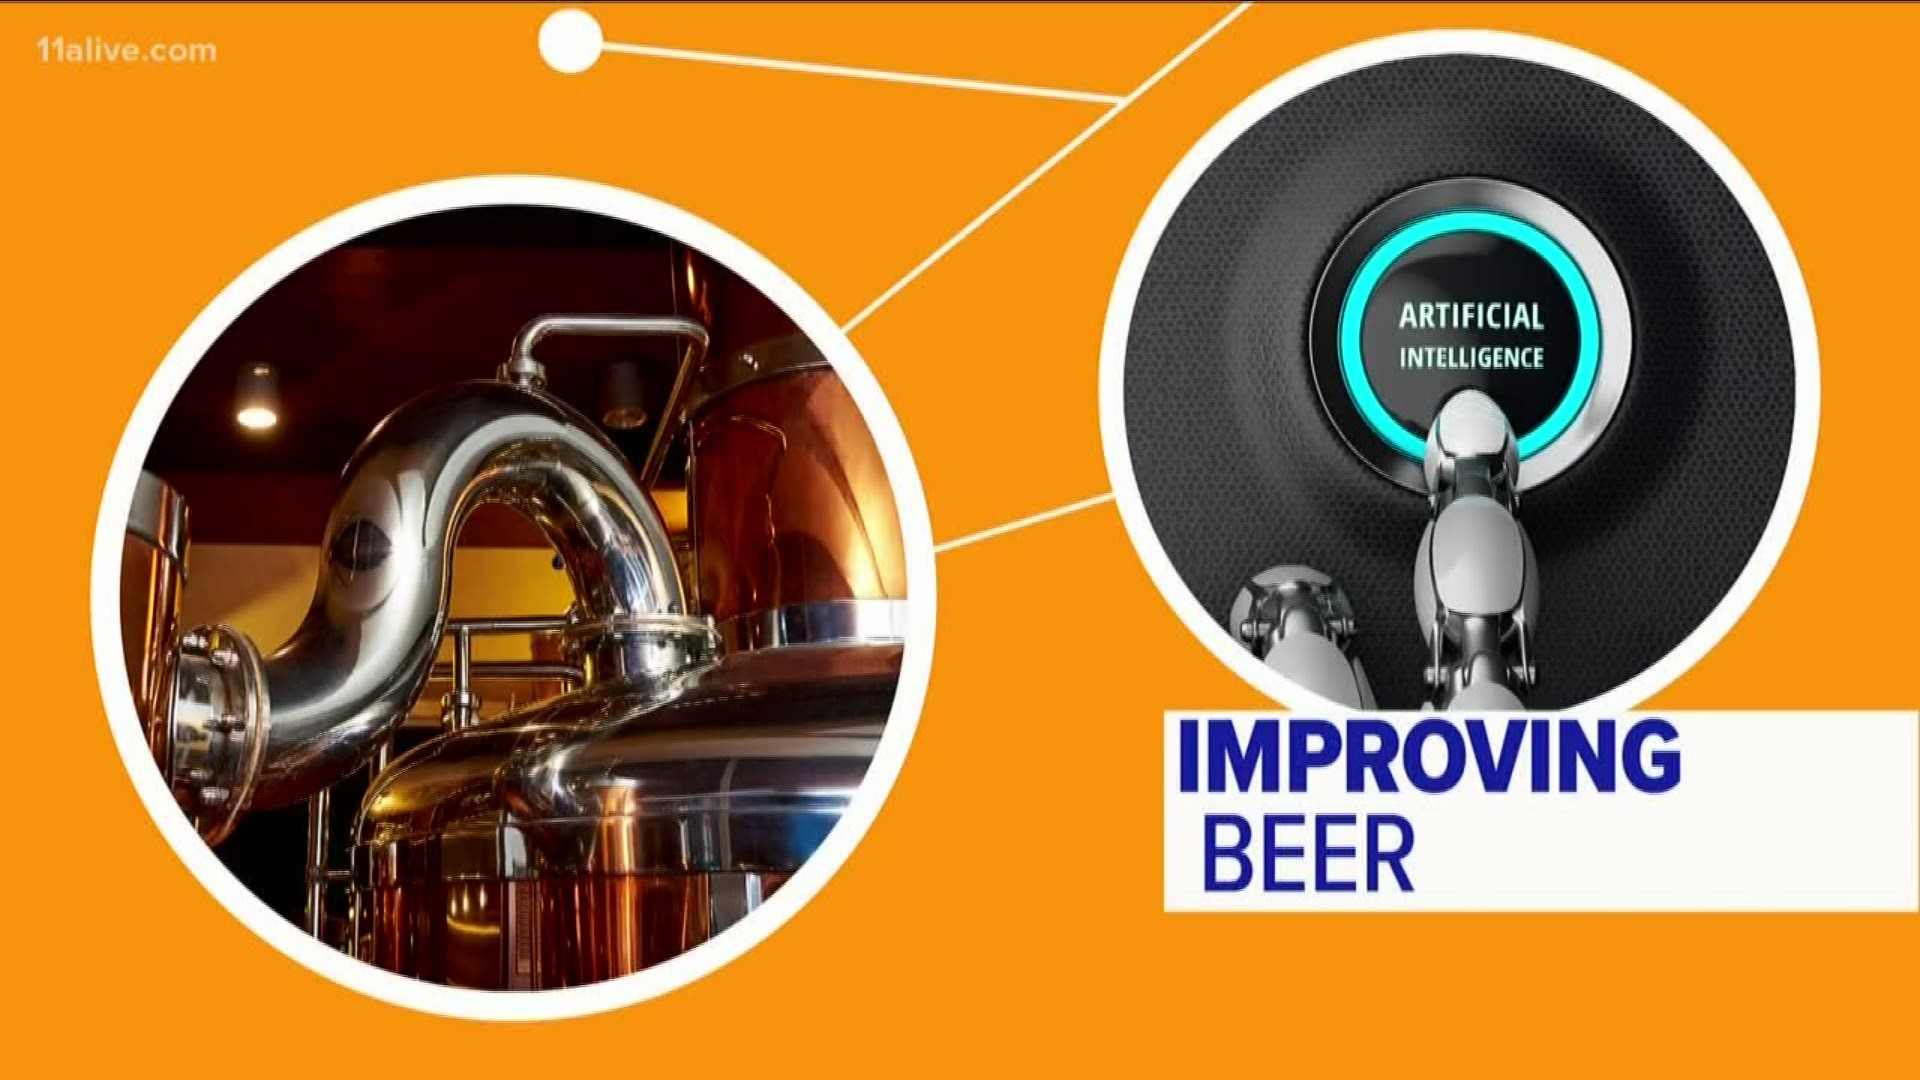 Breweries are turning to artificial intelligence to help improve the taste of their beers.